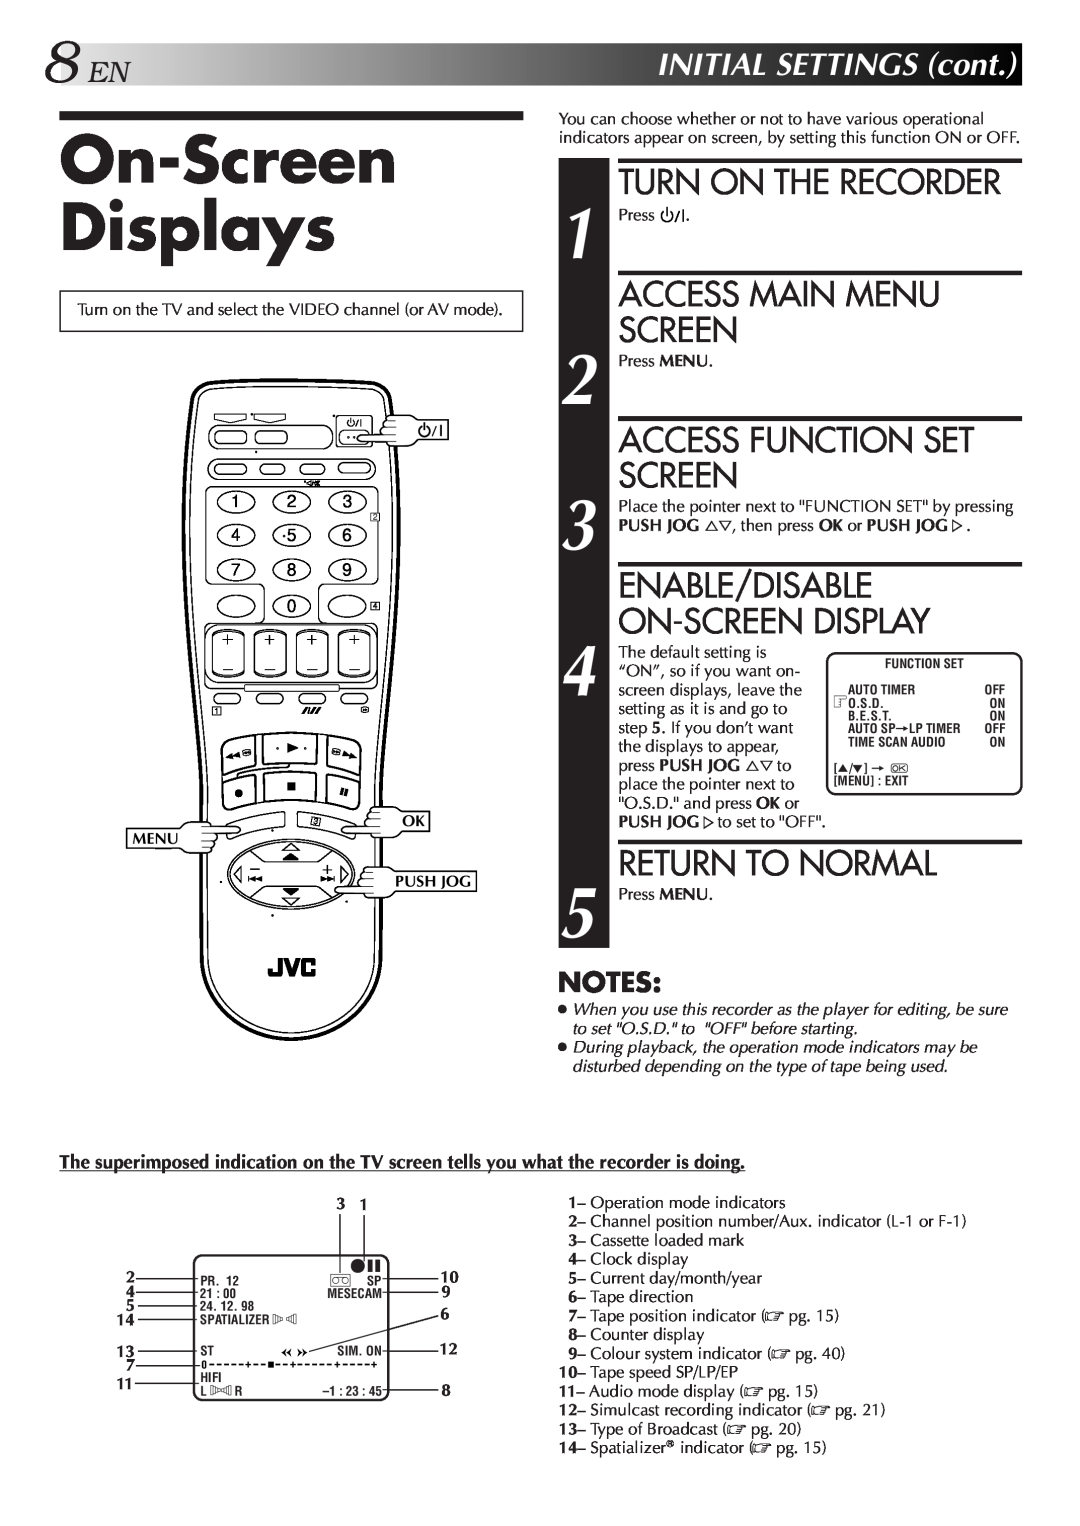 JVC HR-DD857MS specifications On-Screen Displays, Turn On The Recorder, Access Main Menu, Enable/Disable, Return To Normal 